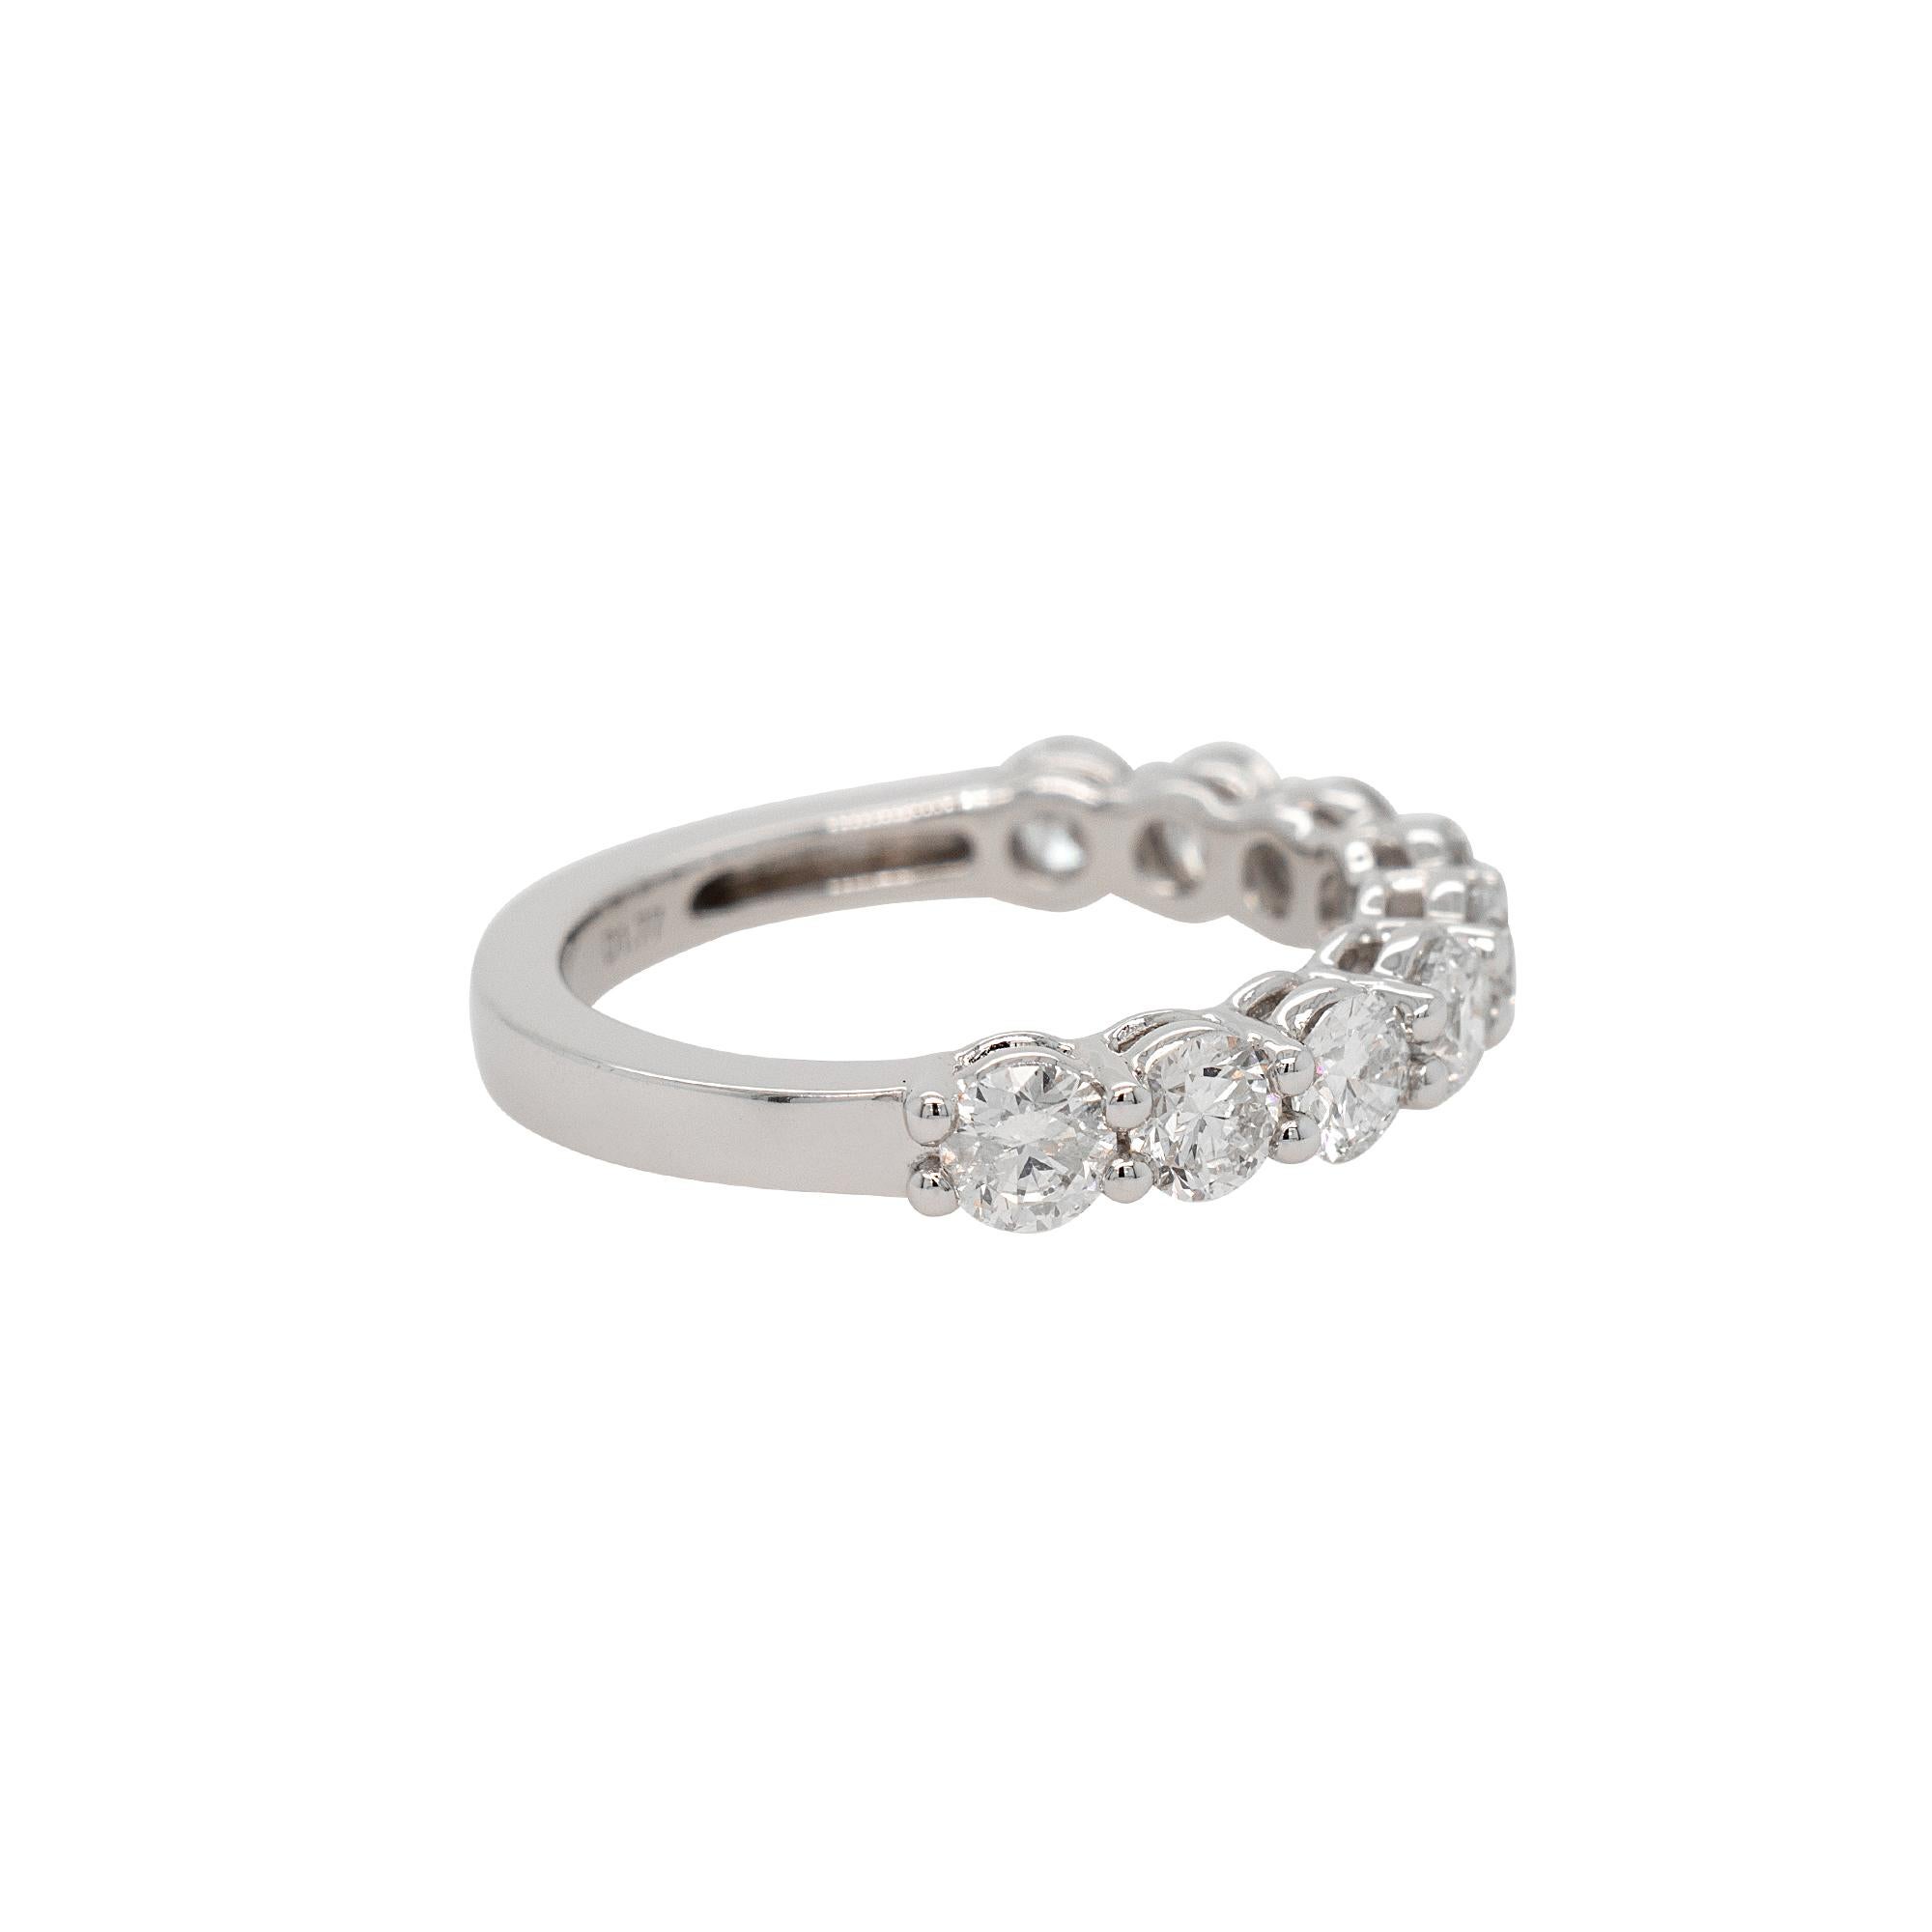 Diamond Details: 
1.77ct Round Brilliant Natural Diamond
G Color VS Clarity
Ring Material: 18k White Gold
Ring Size: 6.5 (can be sized)
Total Weight: 4.1g (2.7dwt)
This item comes with a presentation box!
SKU: A30317335

With its timeless allure and